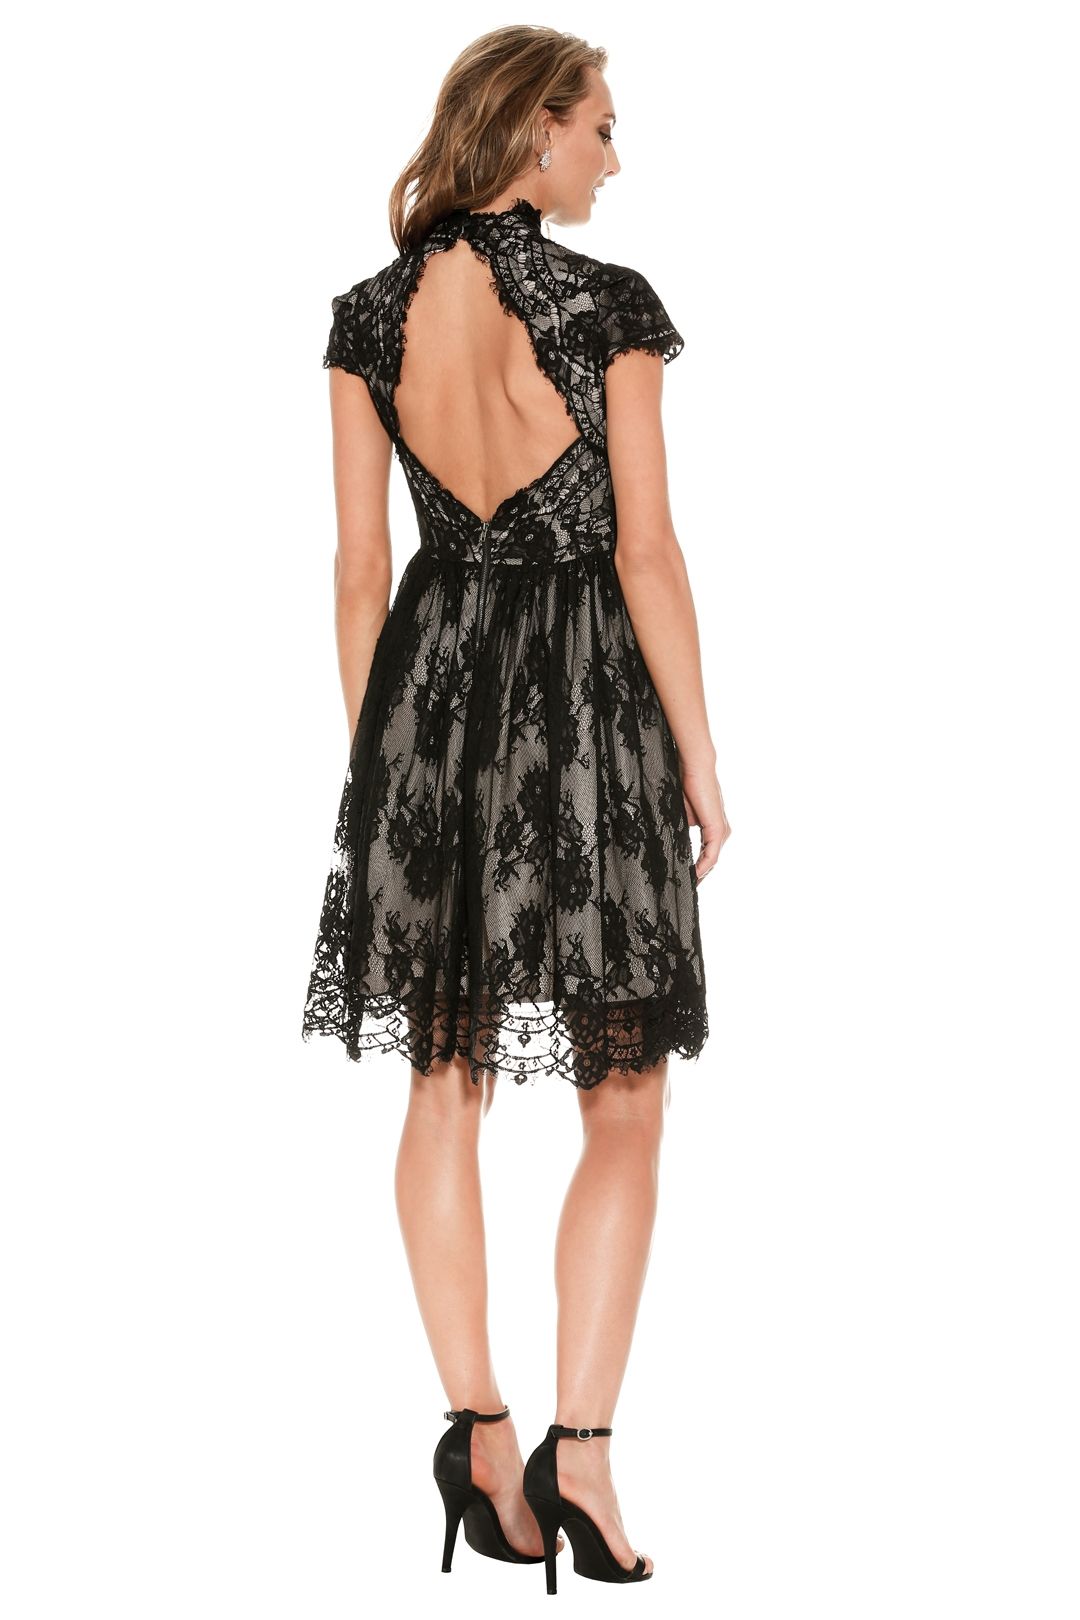 Grace and Hart - Lacy Shadow Dress - Black - Back